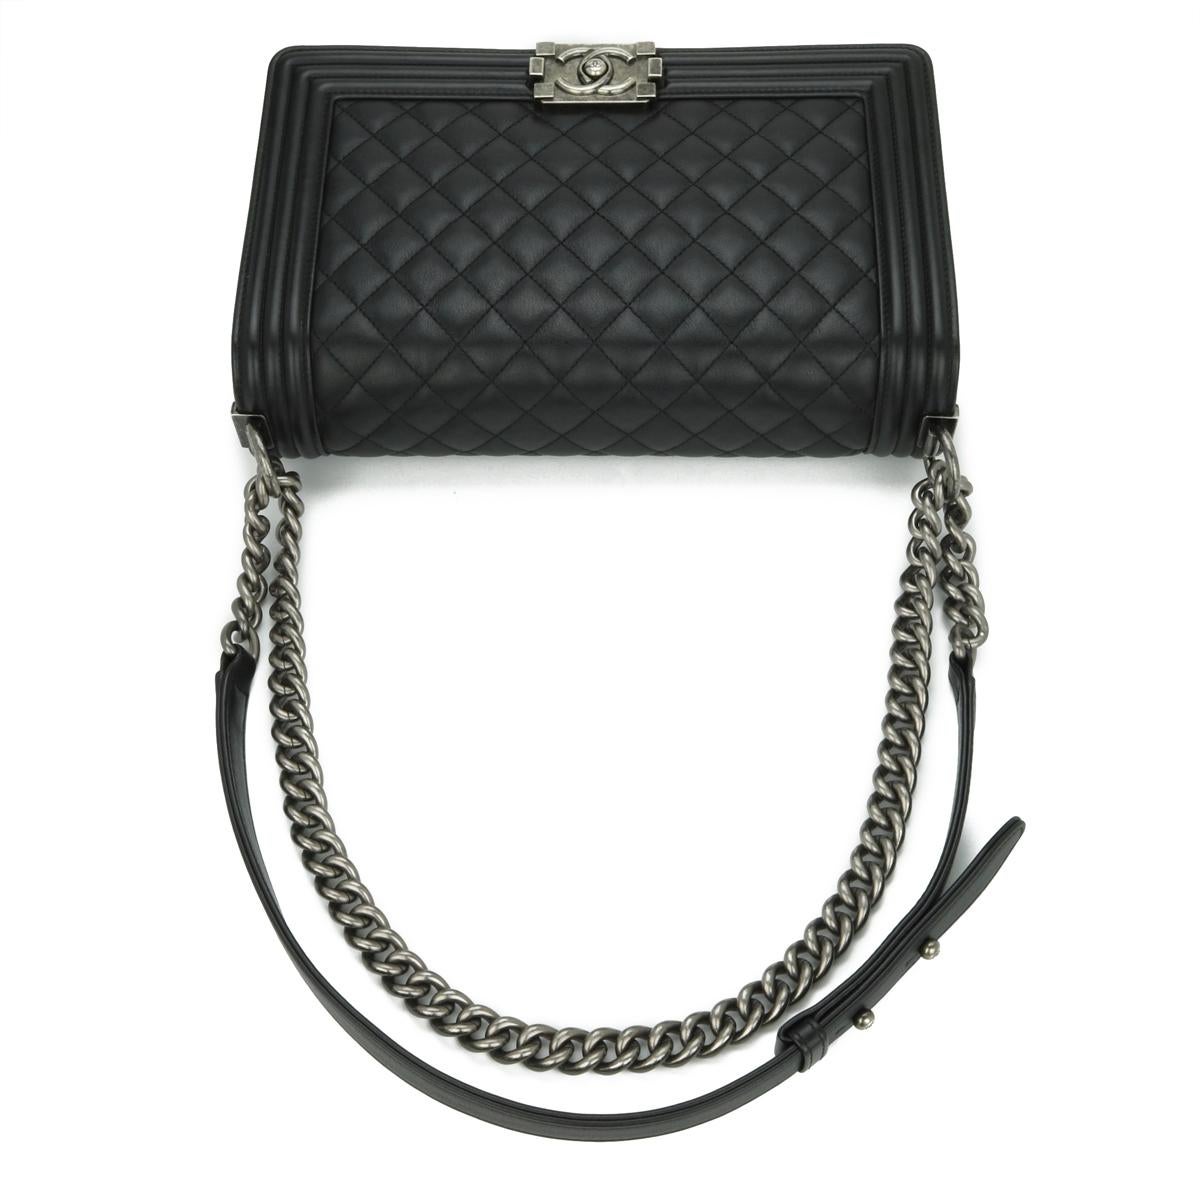 CHANEL New Medium Quilted Boy Bag in Black Calfskin with Ruthenium Hardware 2015 For Sale 7